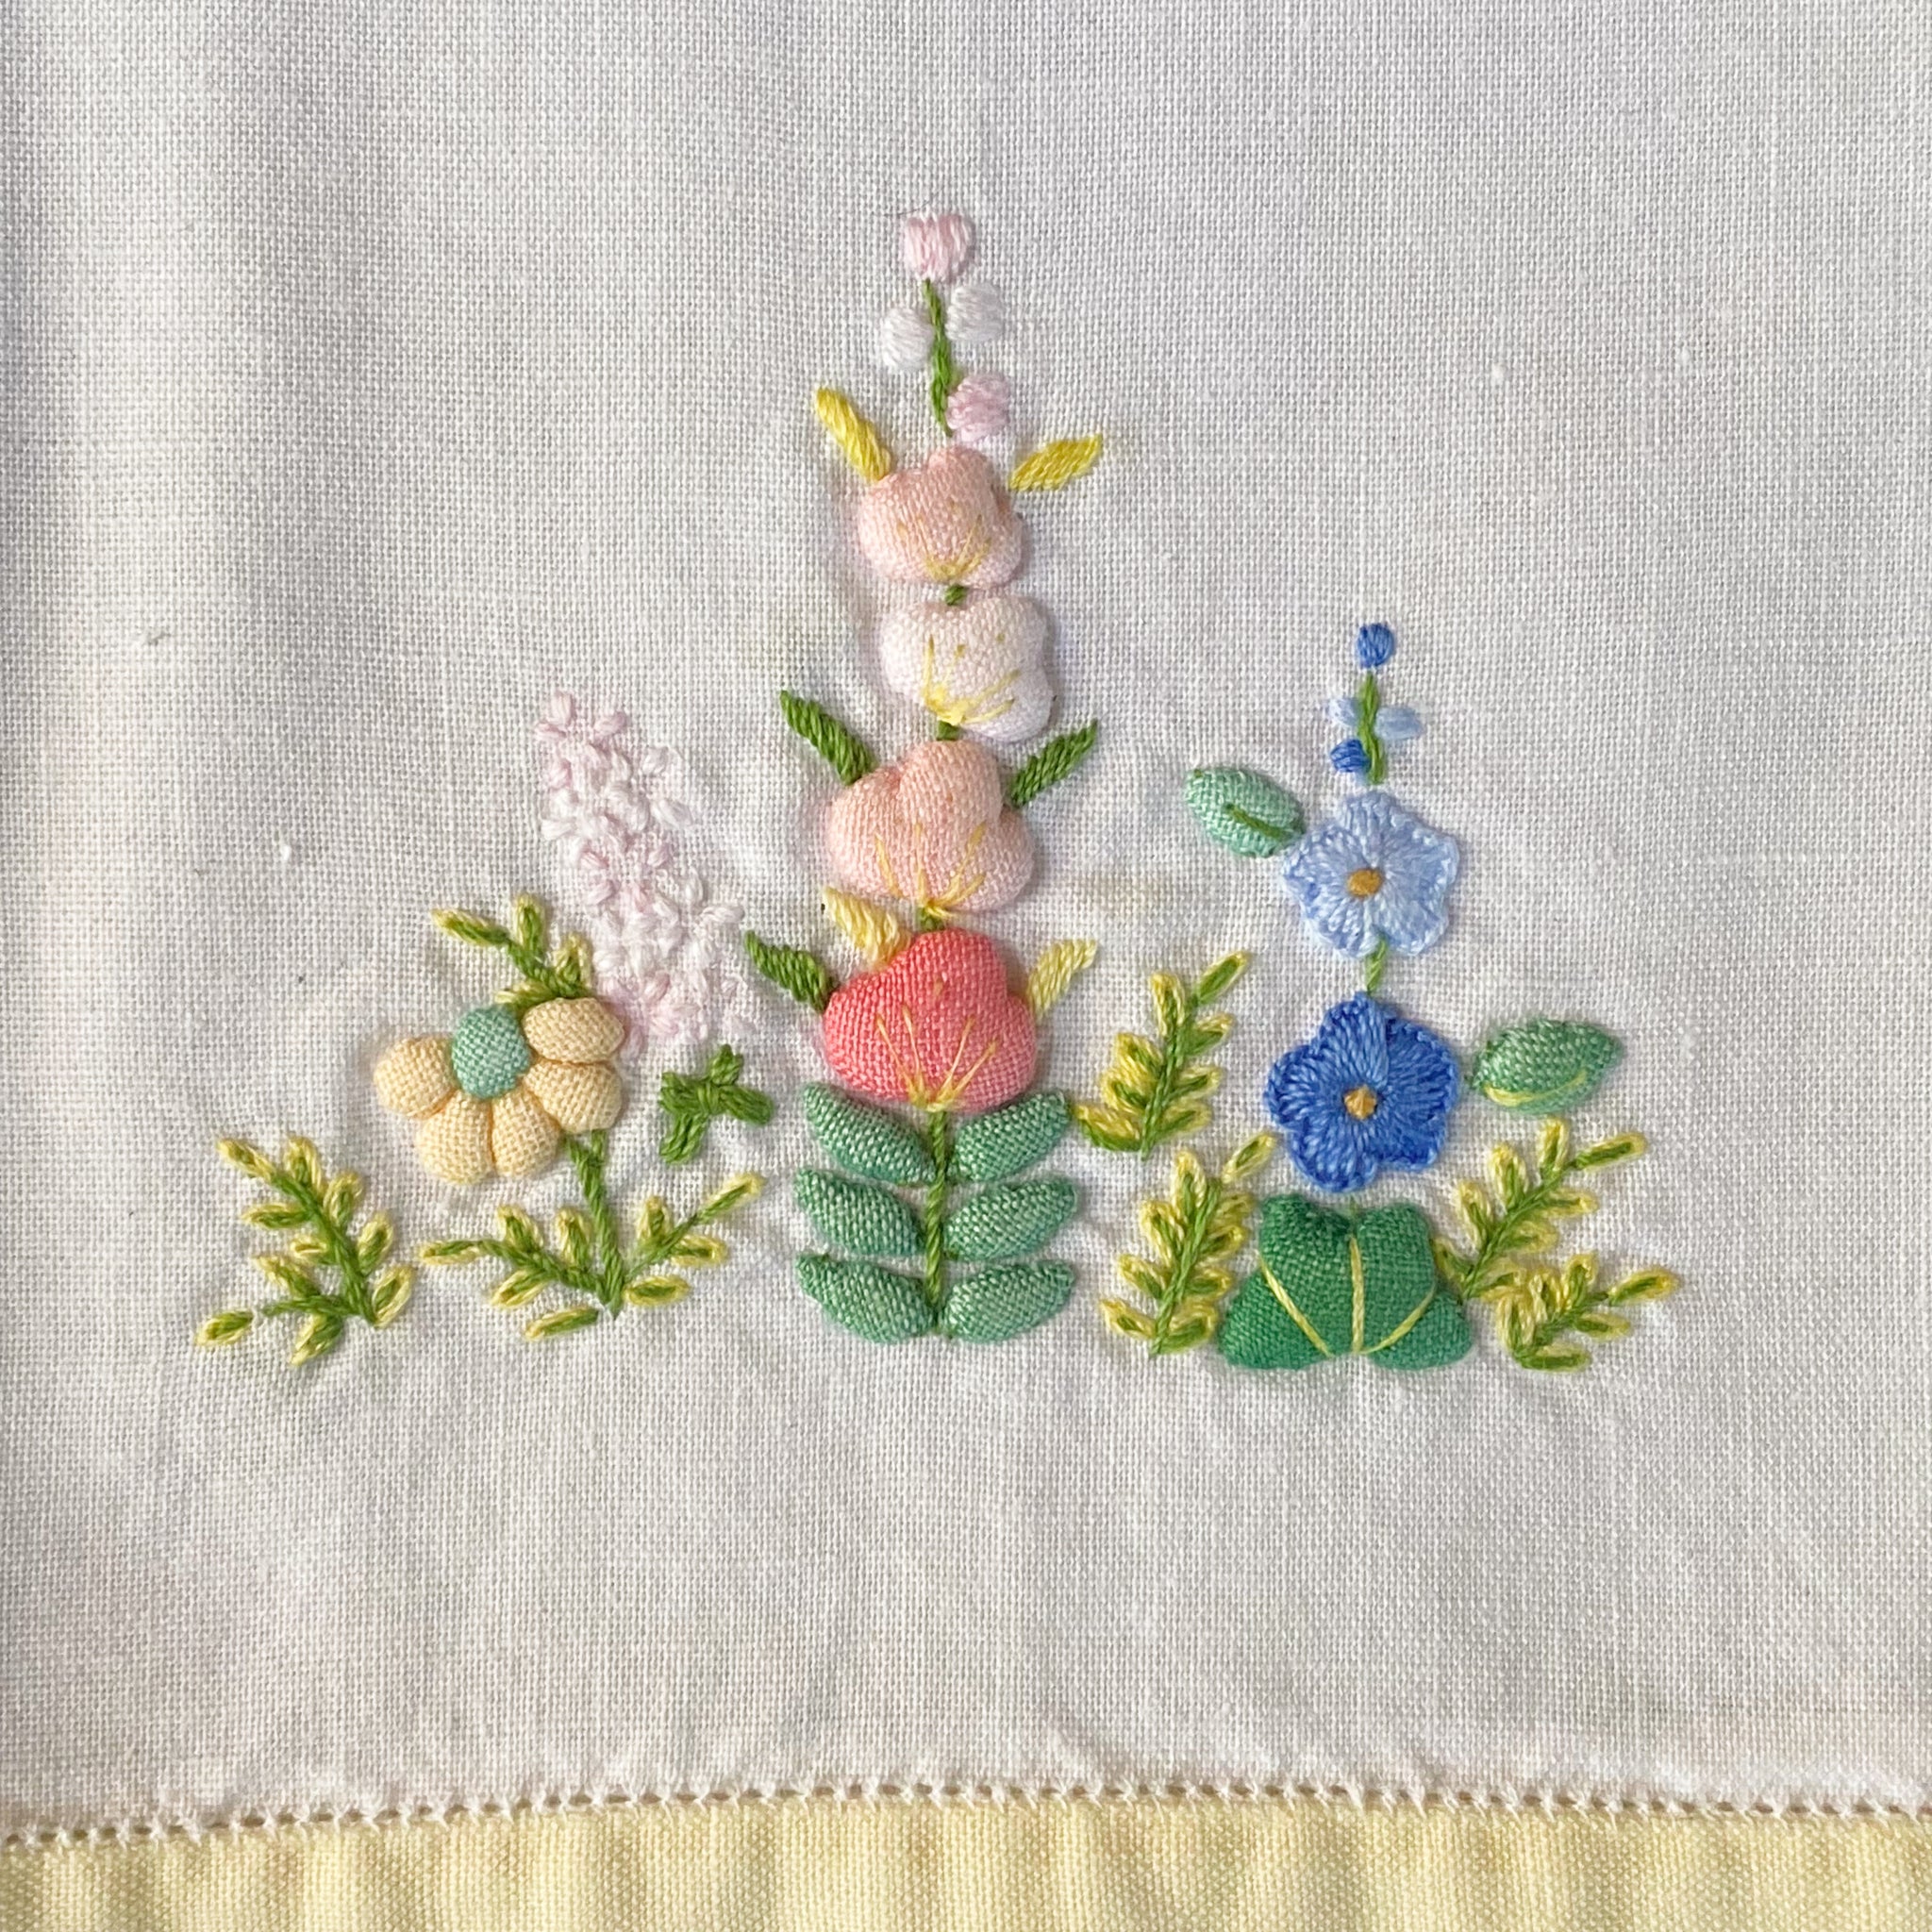 Vintage 1950s Trapunto Embroidered Cotton Floral Tea Towel with Hollyhock Design